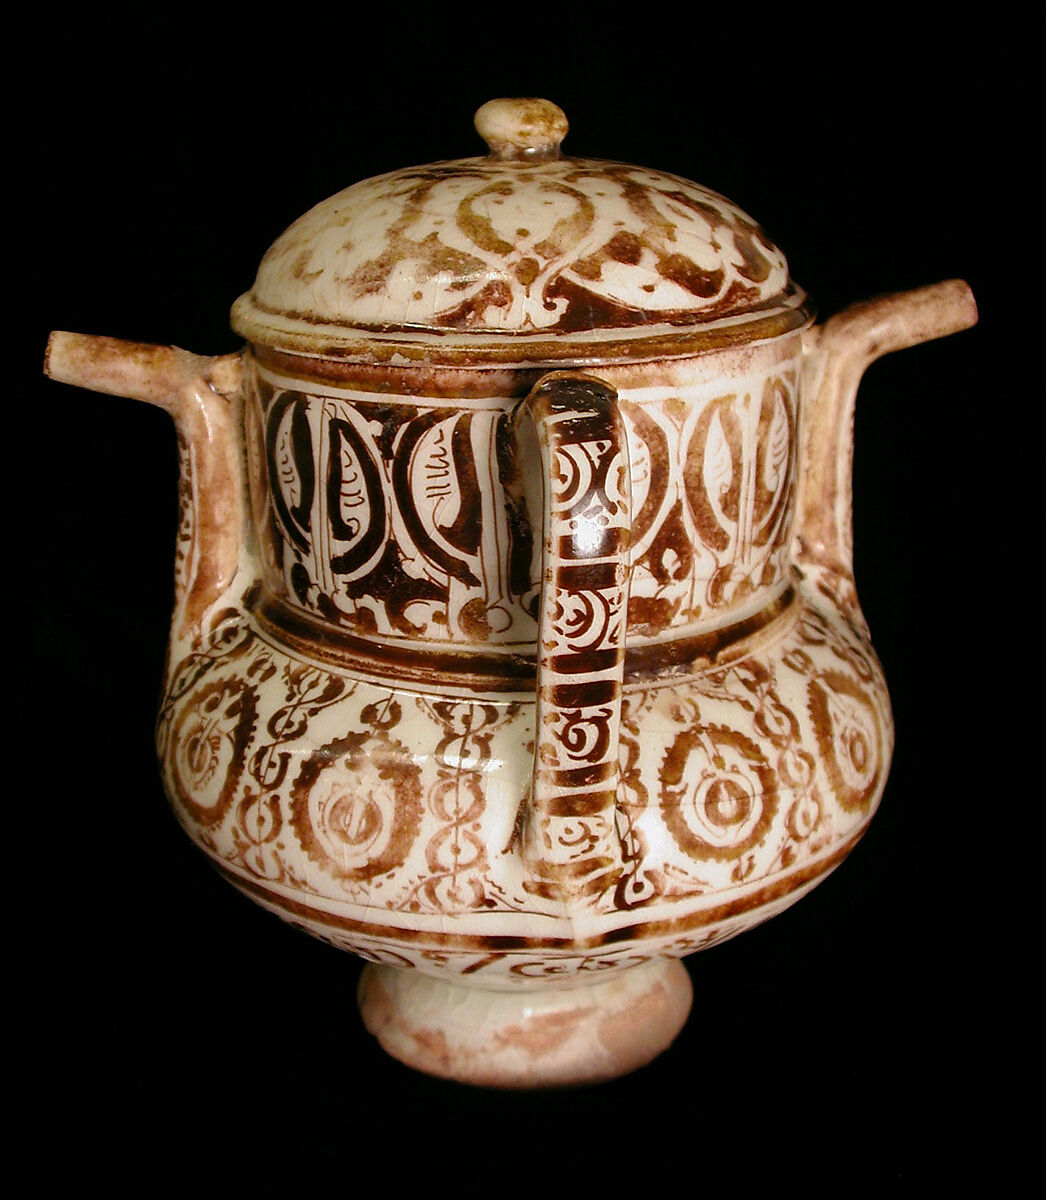 Two-Spouted Vessel with a Lid, Stonepaste; luster-painted on opaque white glaze 